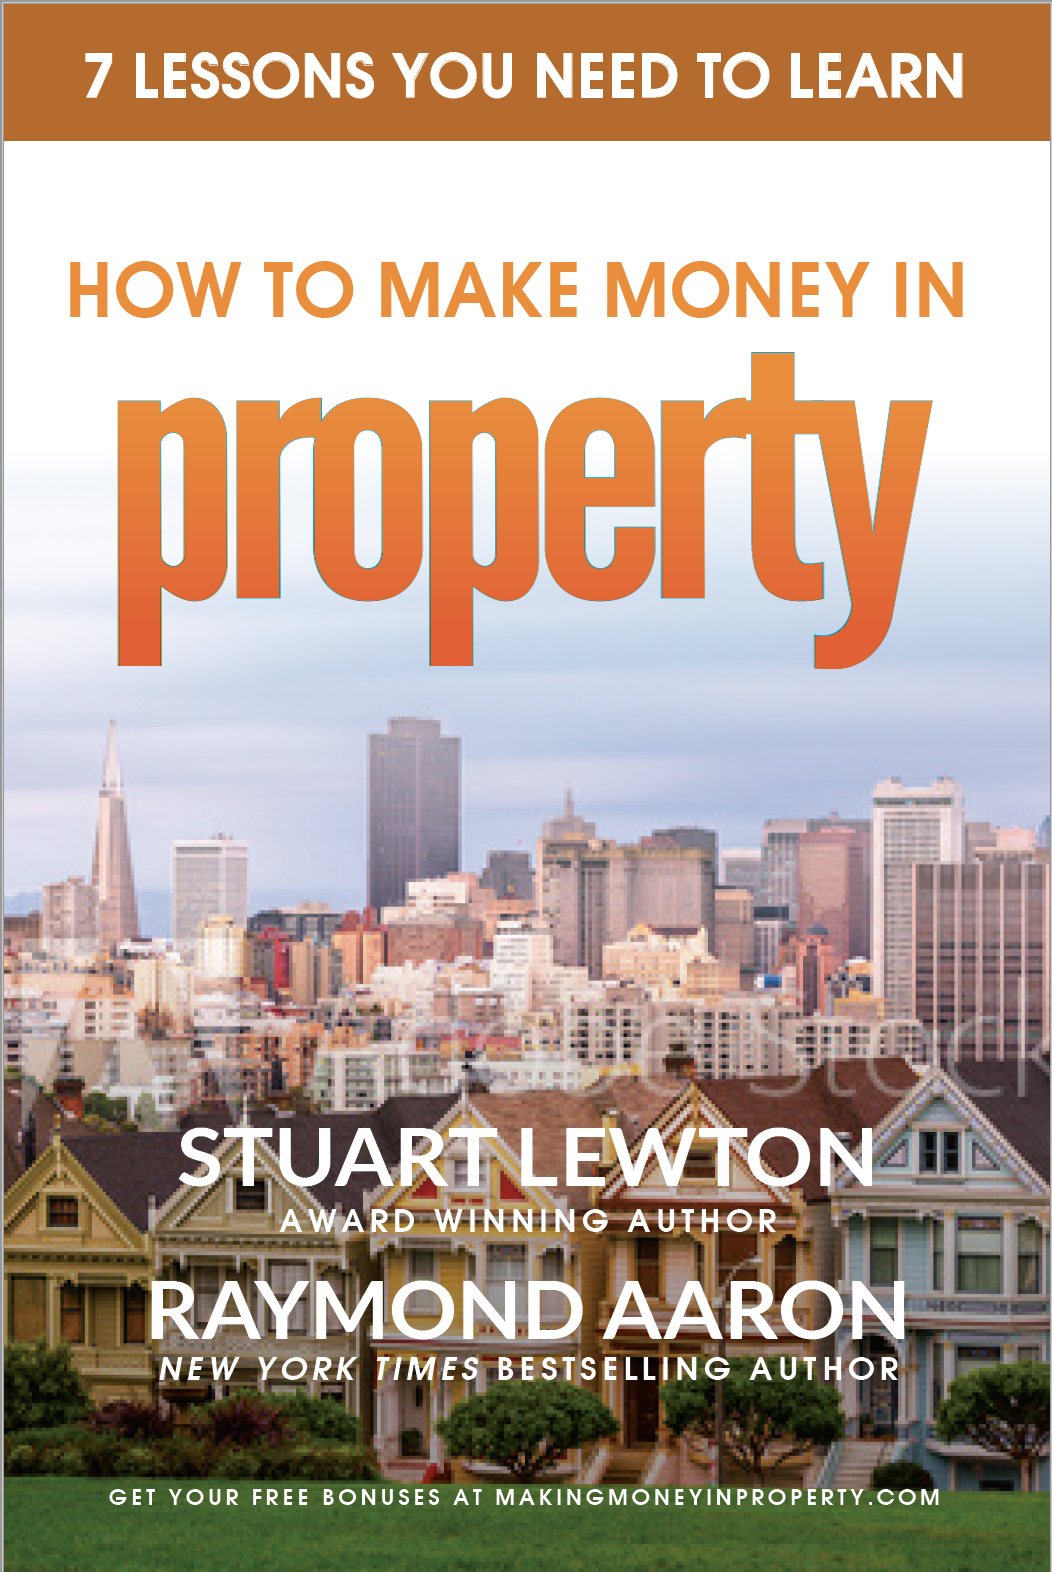 Making Money In Property